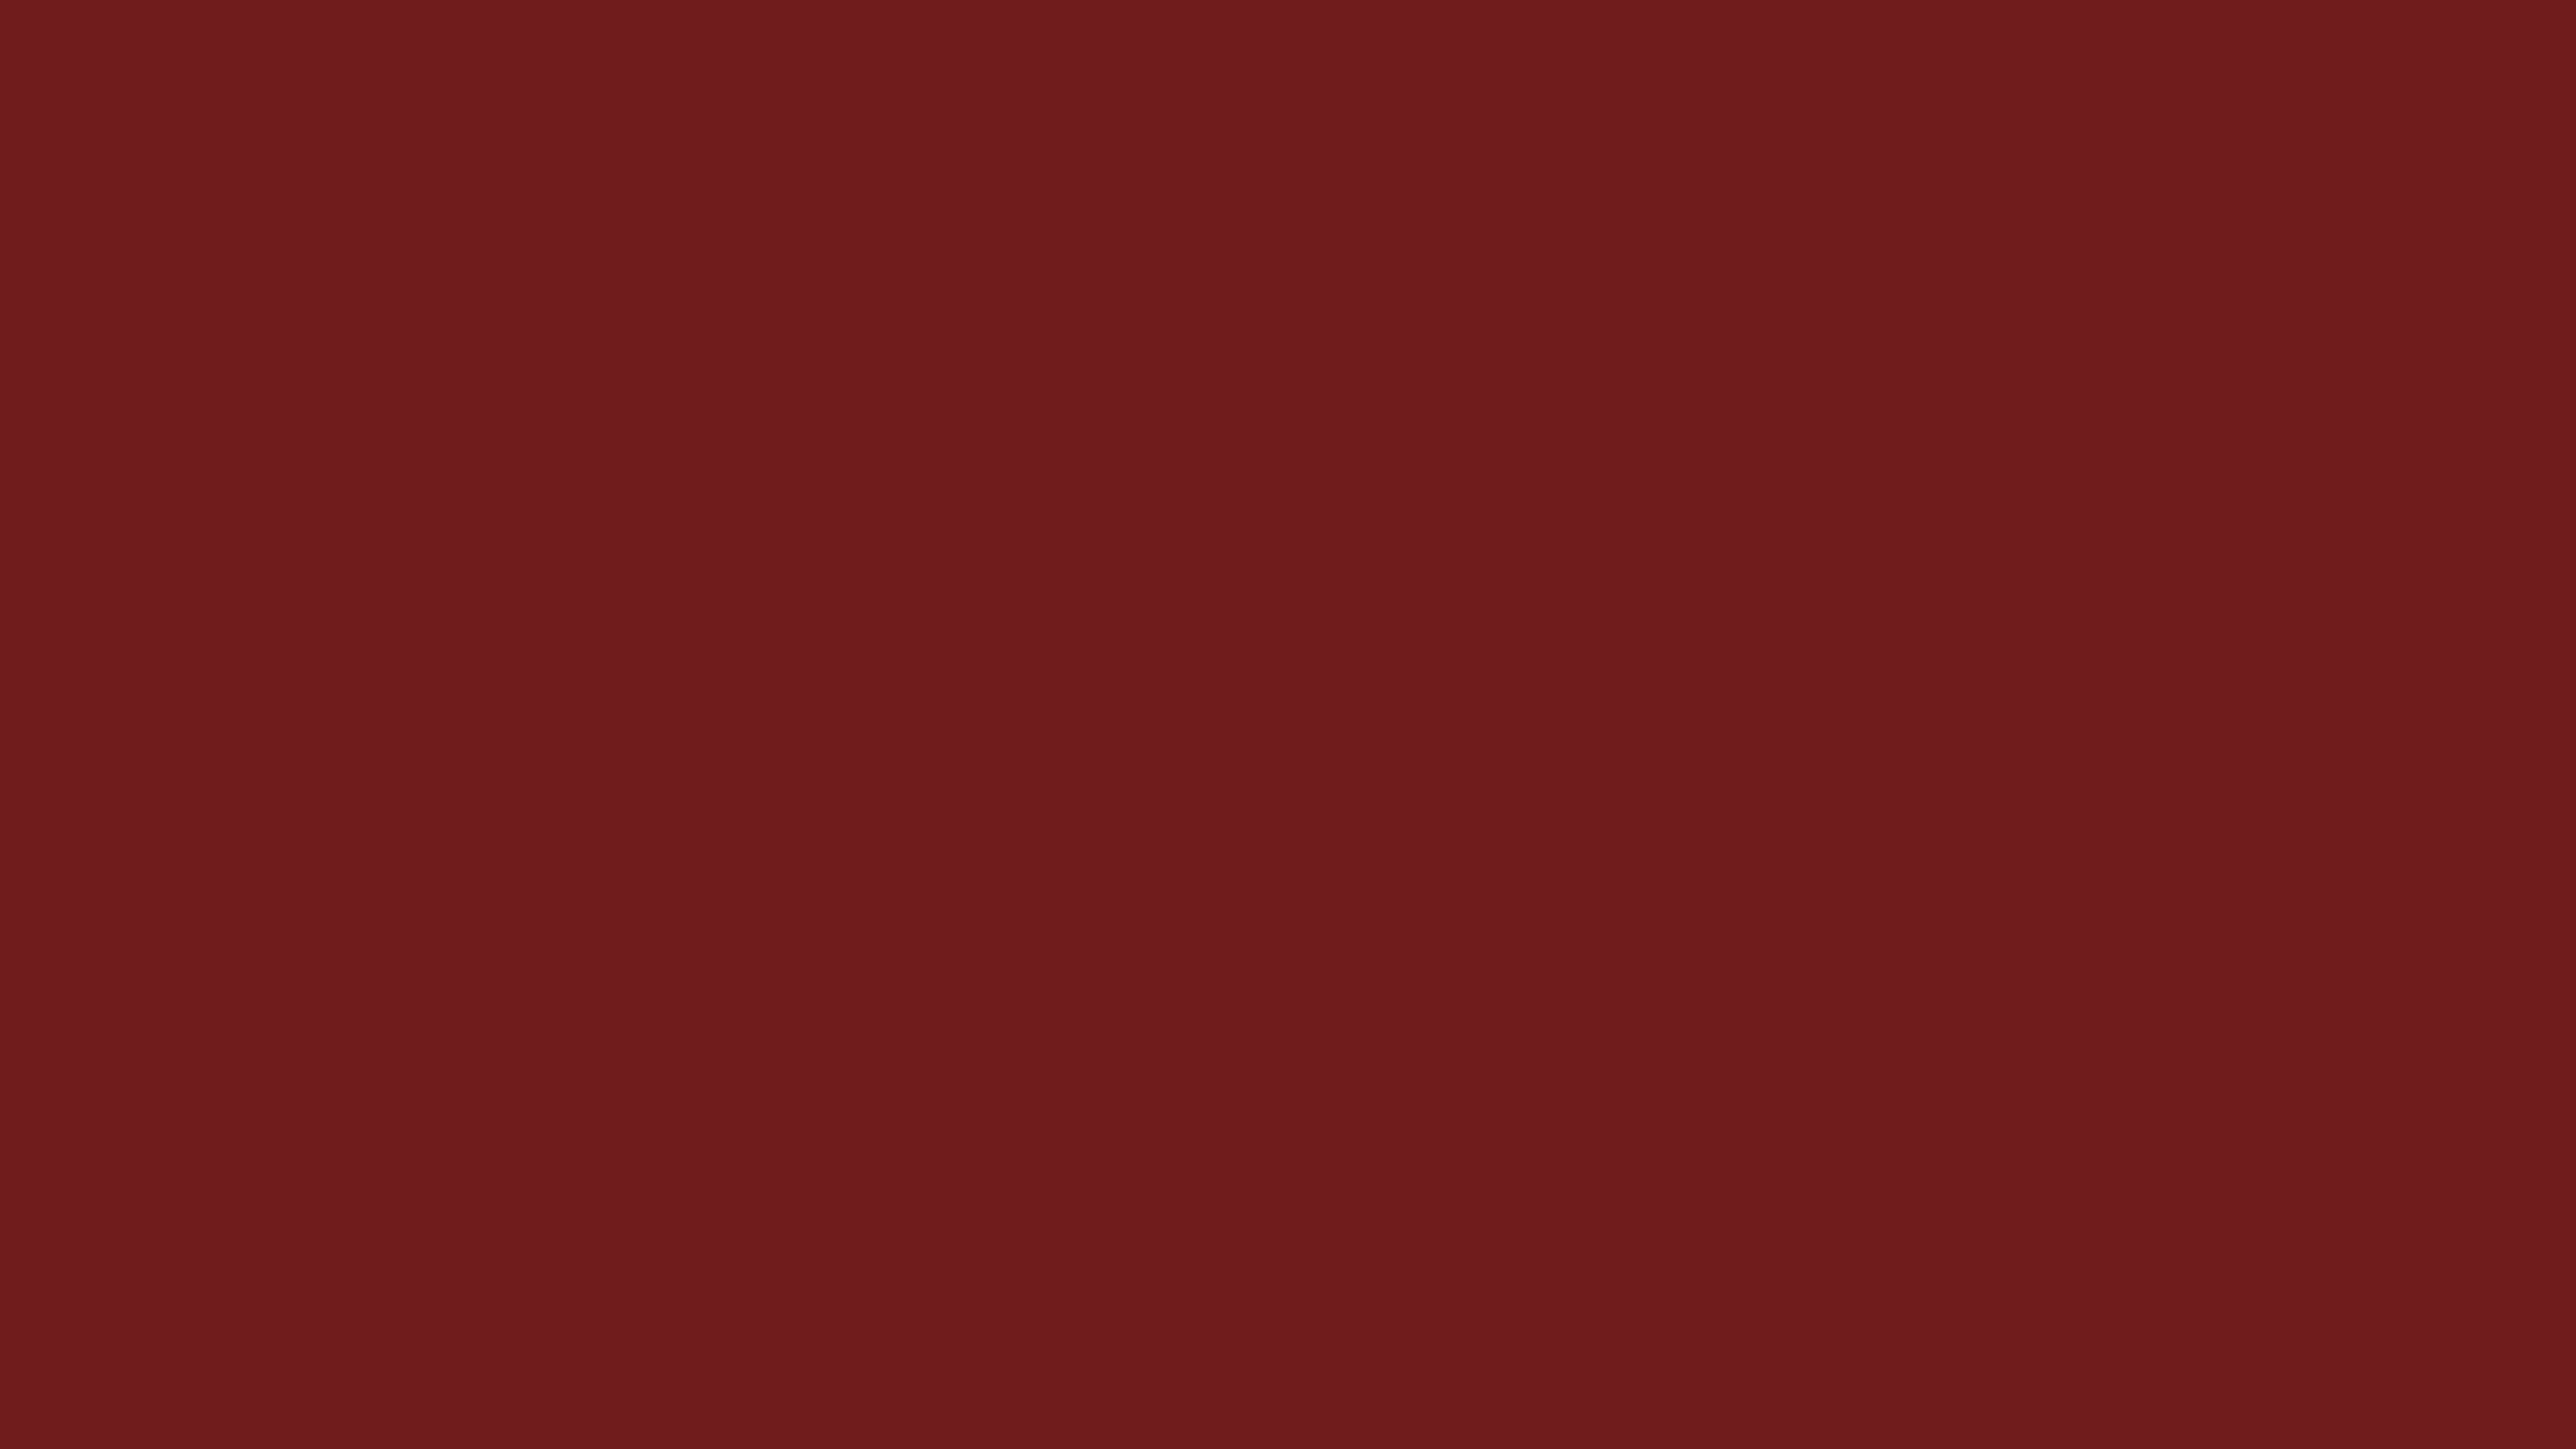 4096x2304 Persian Plum Solid Color Background